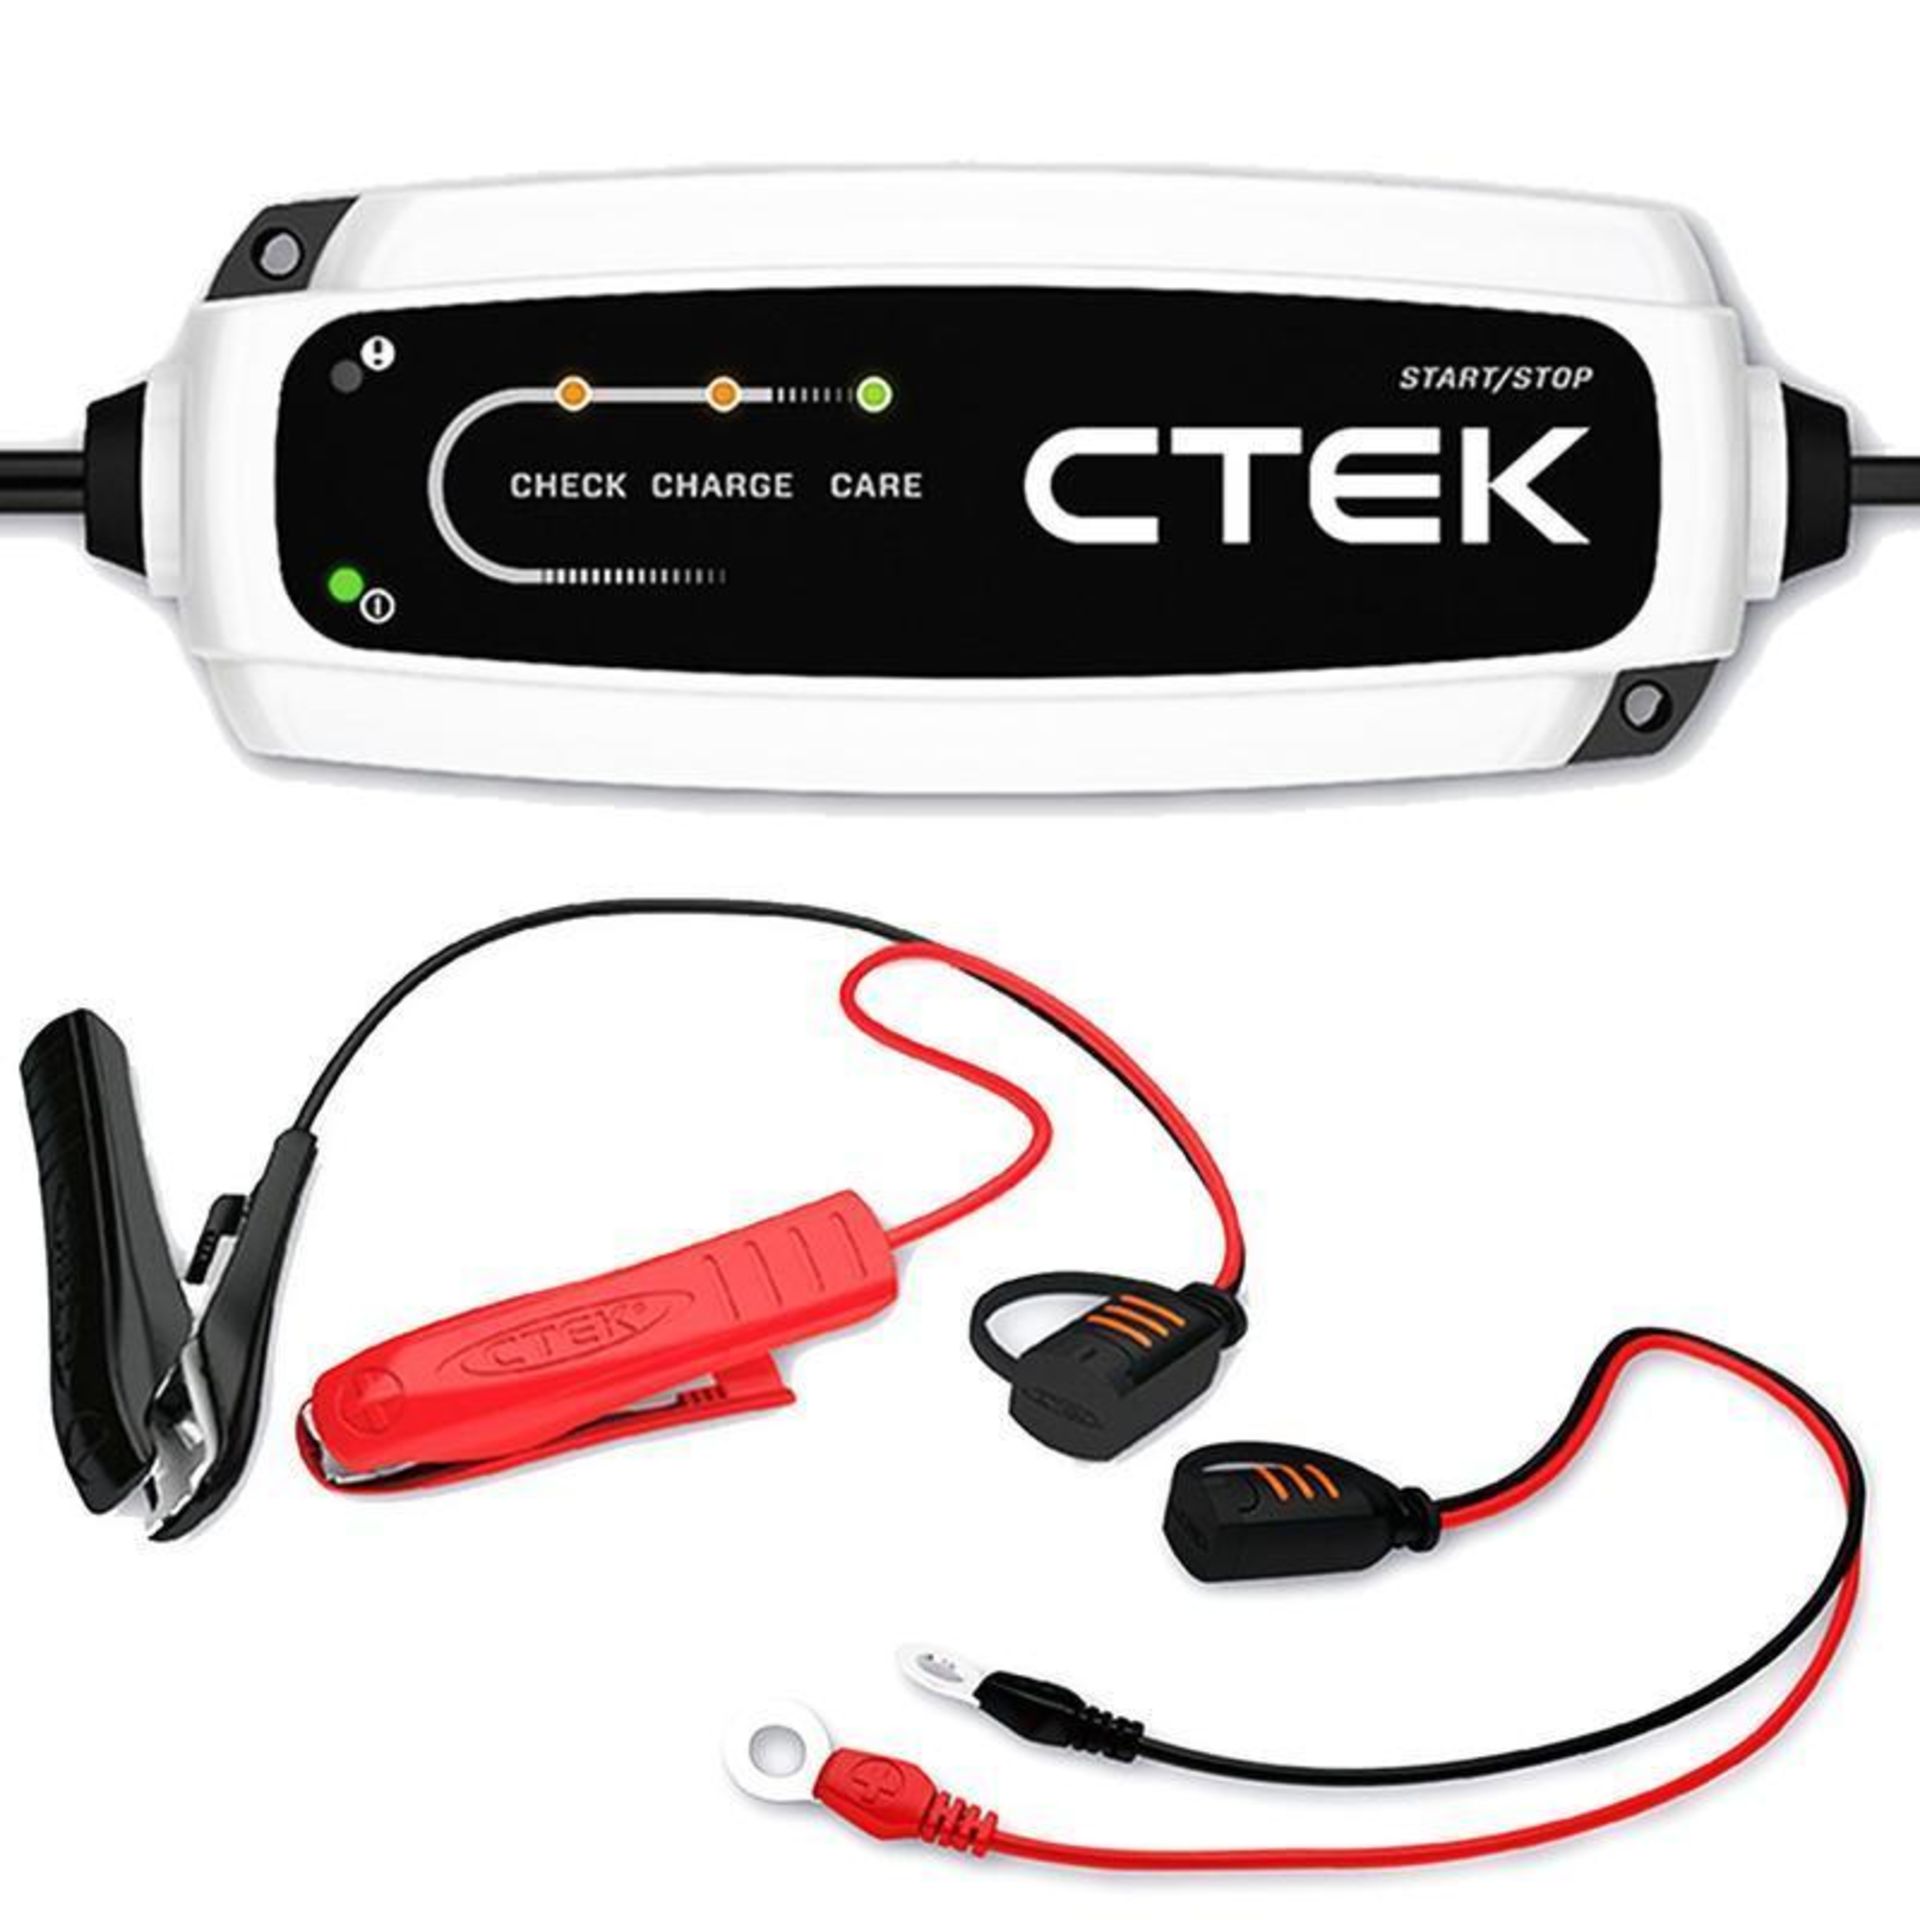 CTEK (40-255) CT5 Time To Go-12 Volt Battery Charger and Maintainer with Accessories - £70.46 RRP